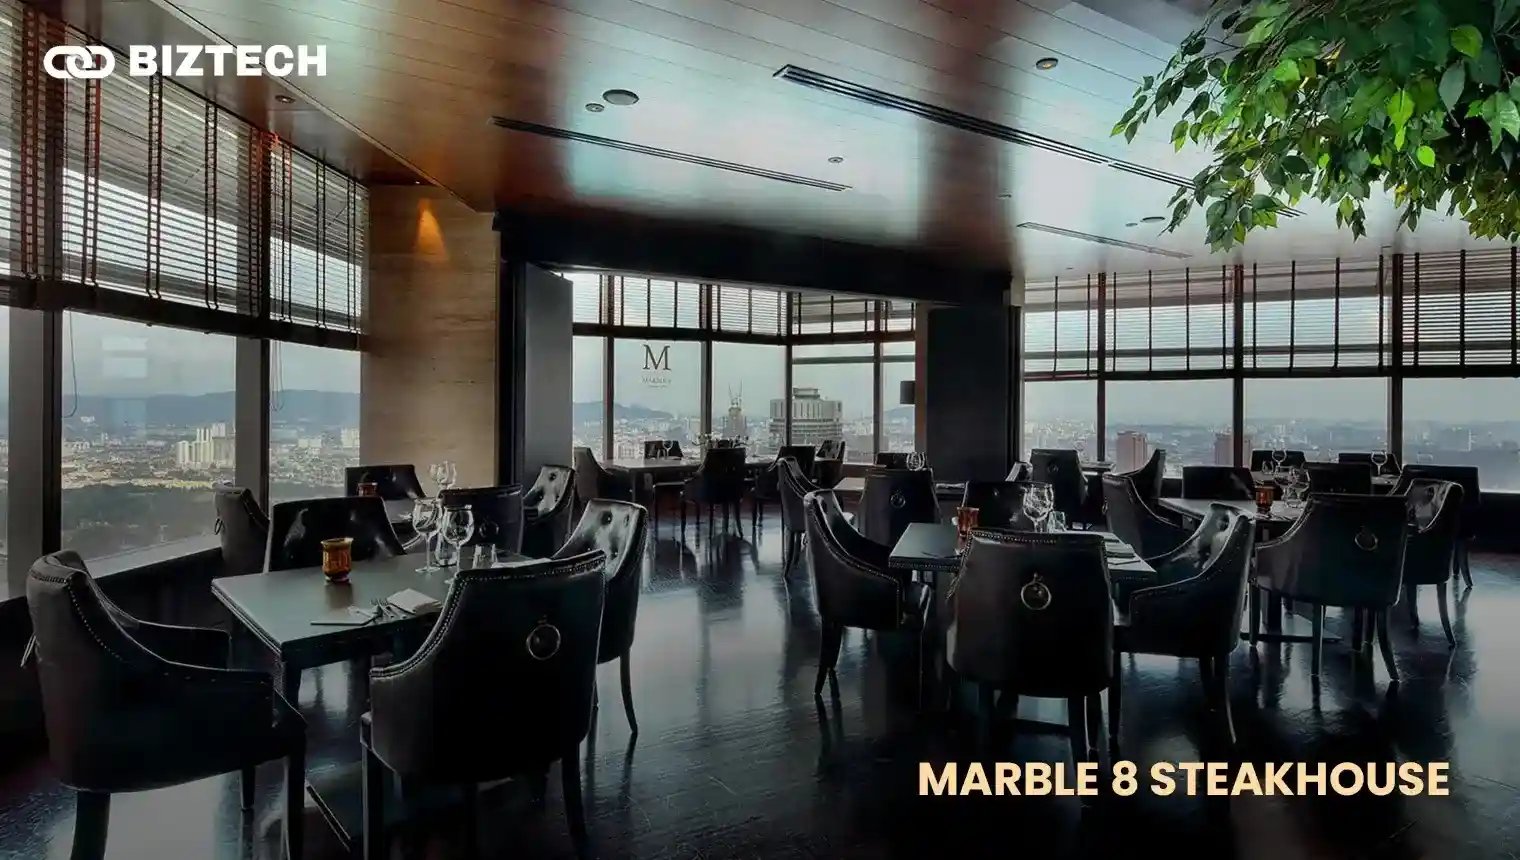 Marble 8 Steakhouse